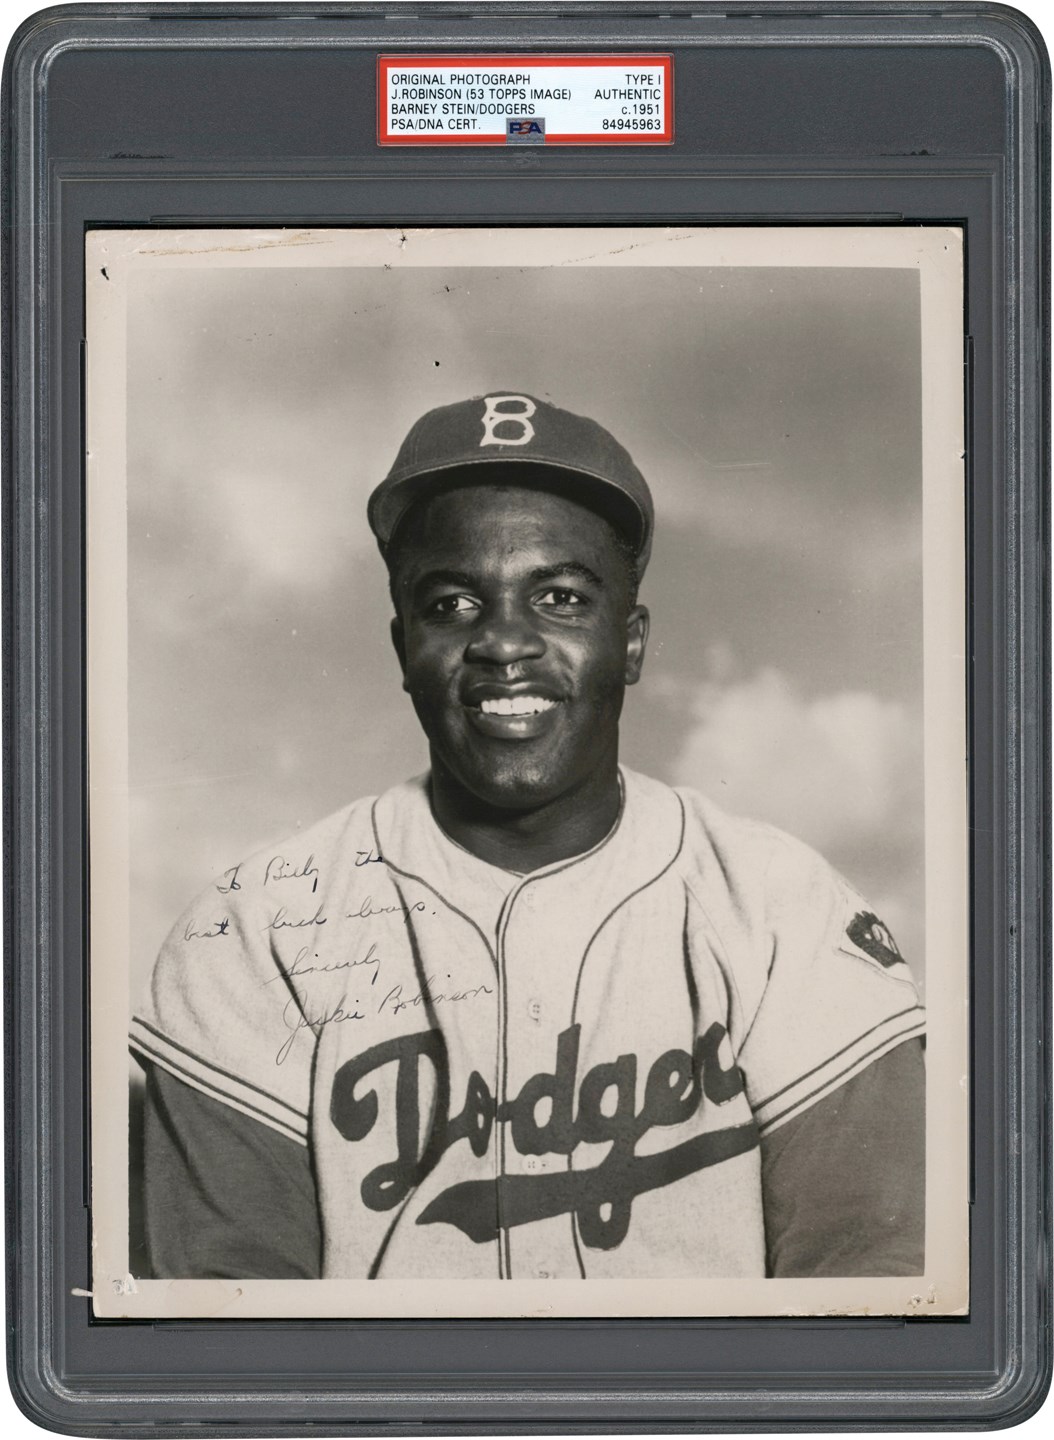 - rca 1951 Jackie Robinson Signed Original Photograph Used for 1953 Topps Card to Teammate Billy Cox (PSA Type I)